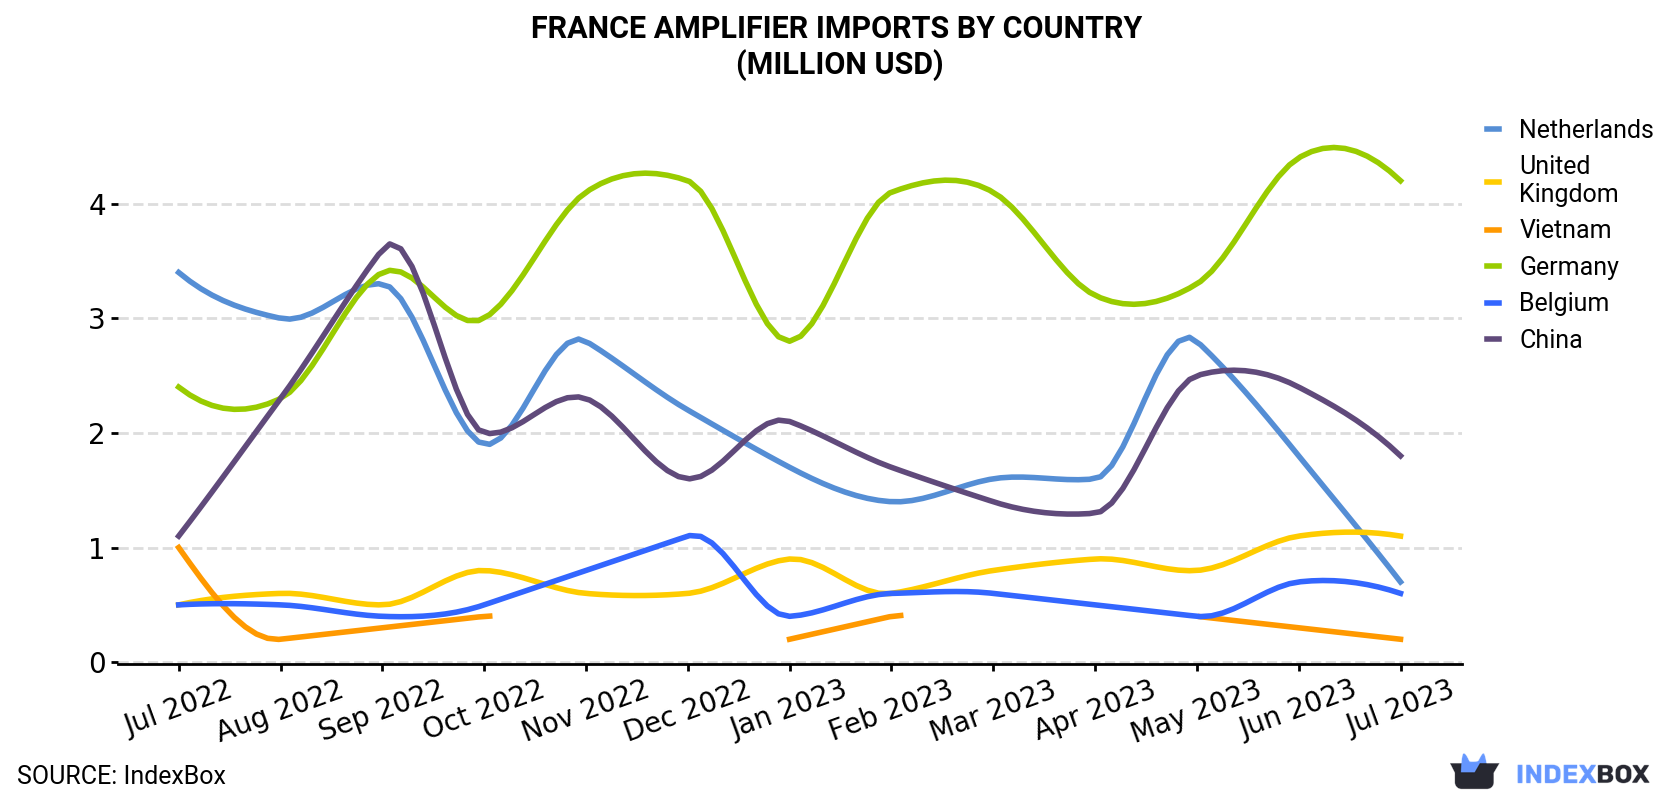 France Amplifier Imports By Country (Million USD)